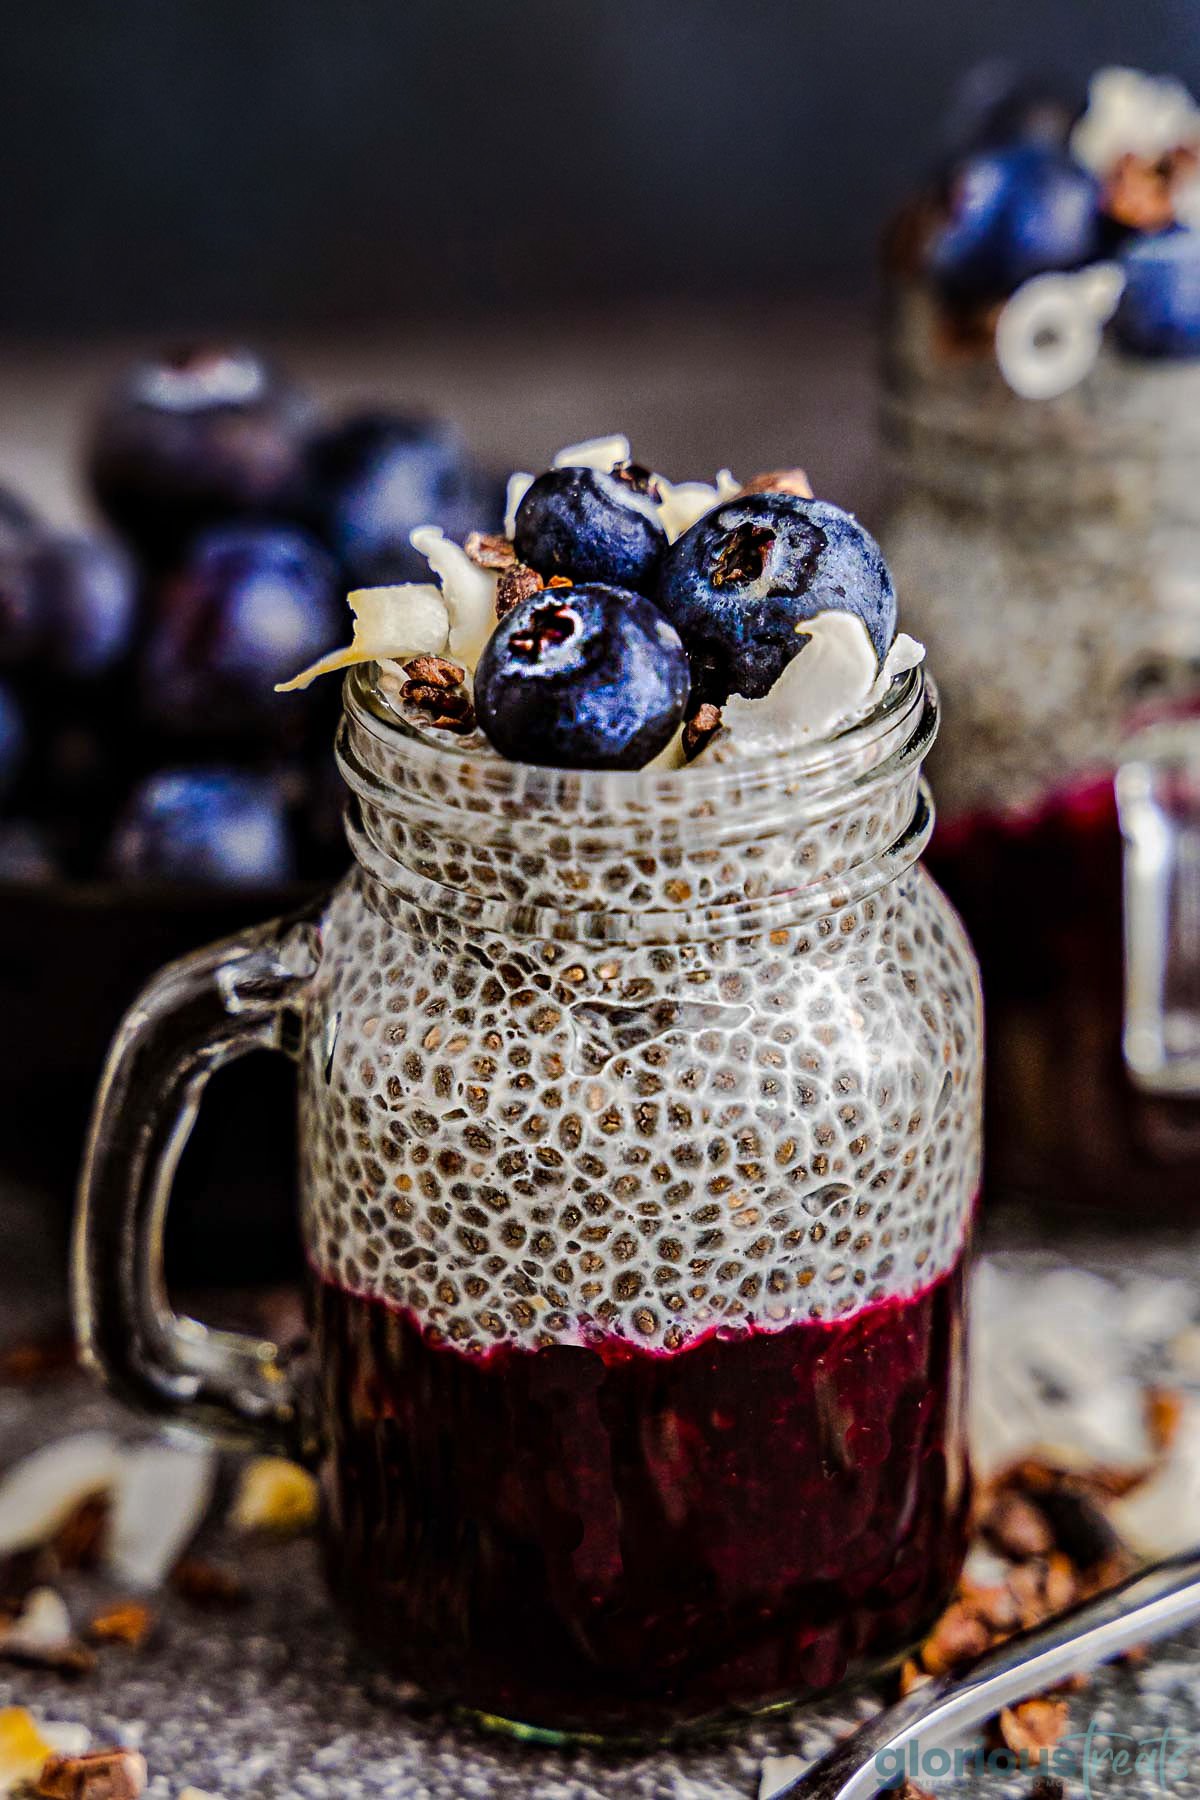 chia seed pudding recipe in a mason jar glass with half a lemon sitting next to it. the pudding is topped with fresh blueberries and coconut flakes and the pudding is layered with blueberry compote.